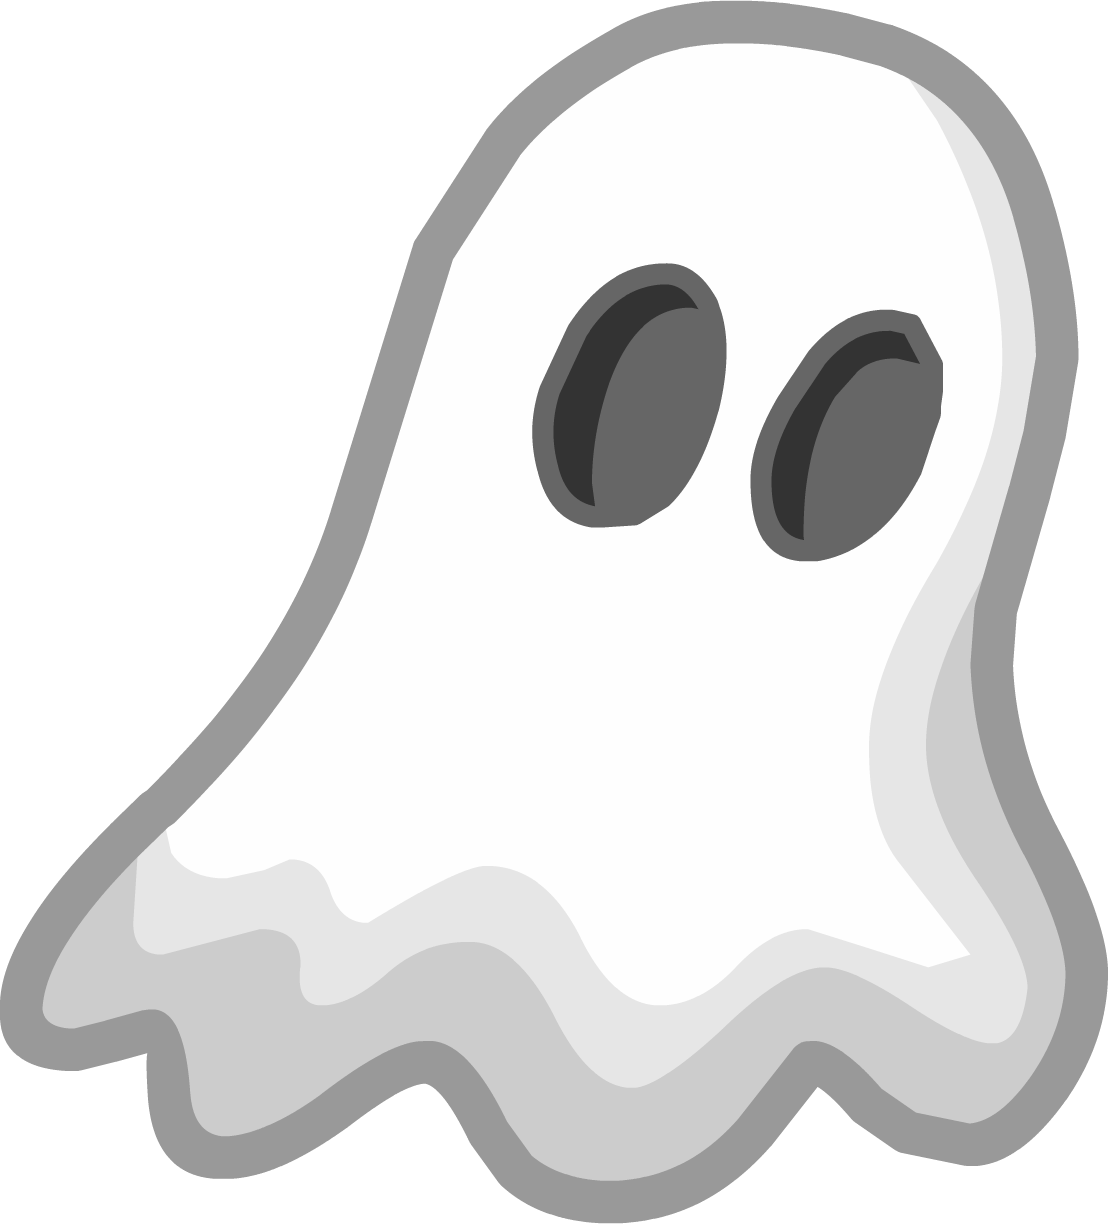 Png image with transparent. Emoji clipart ghost